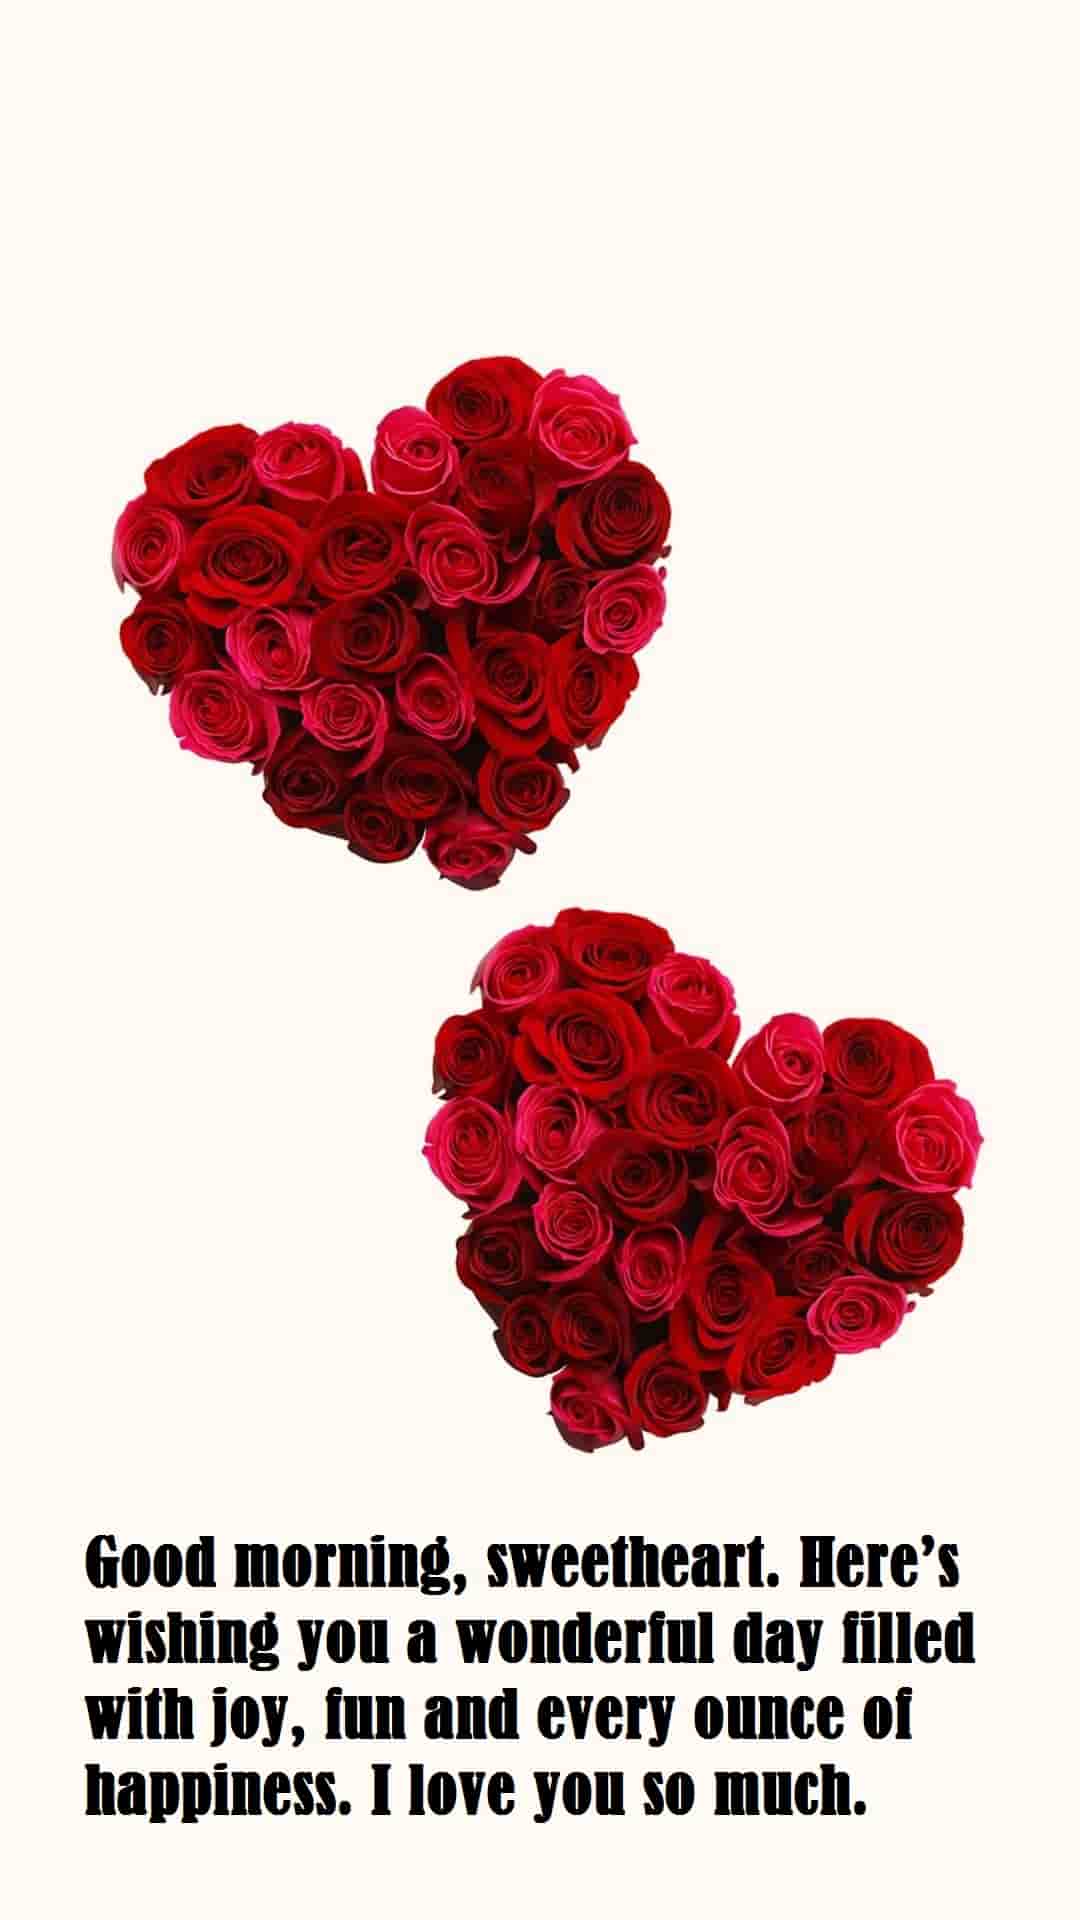 tow cute red rose hearts with love msg